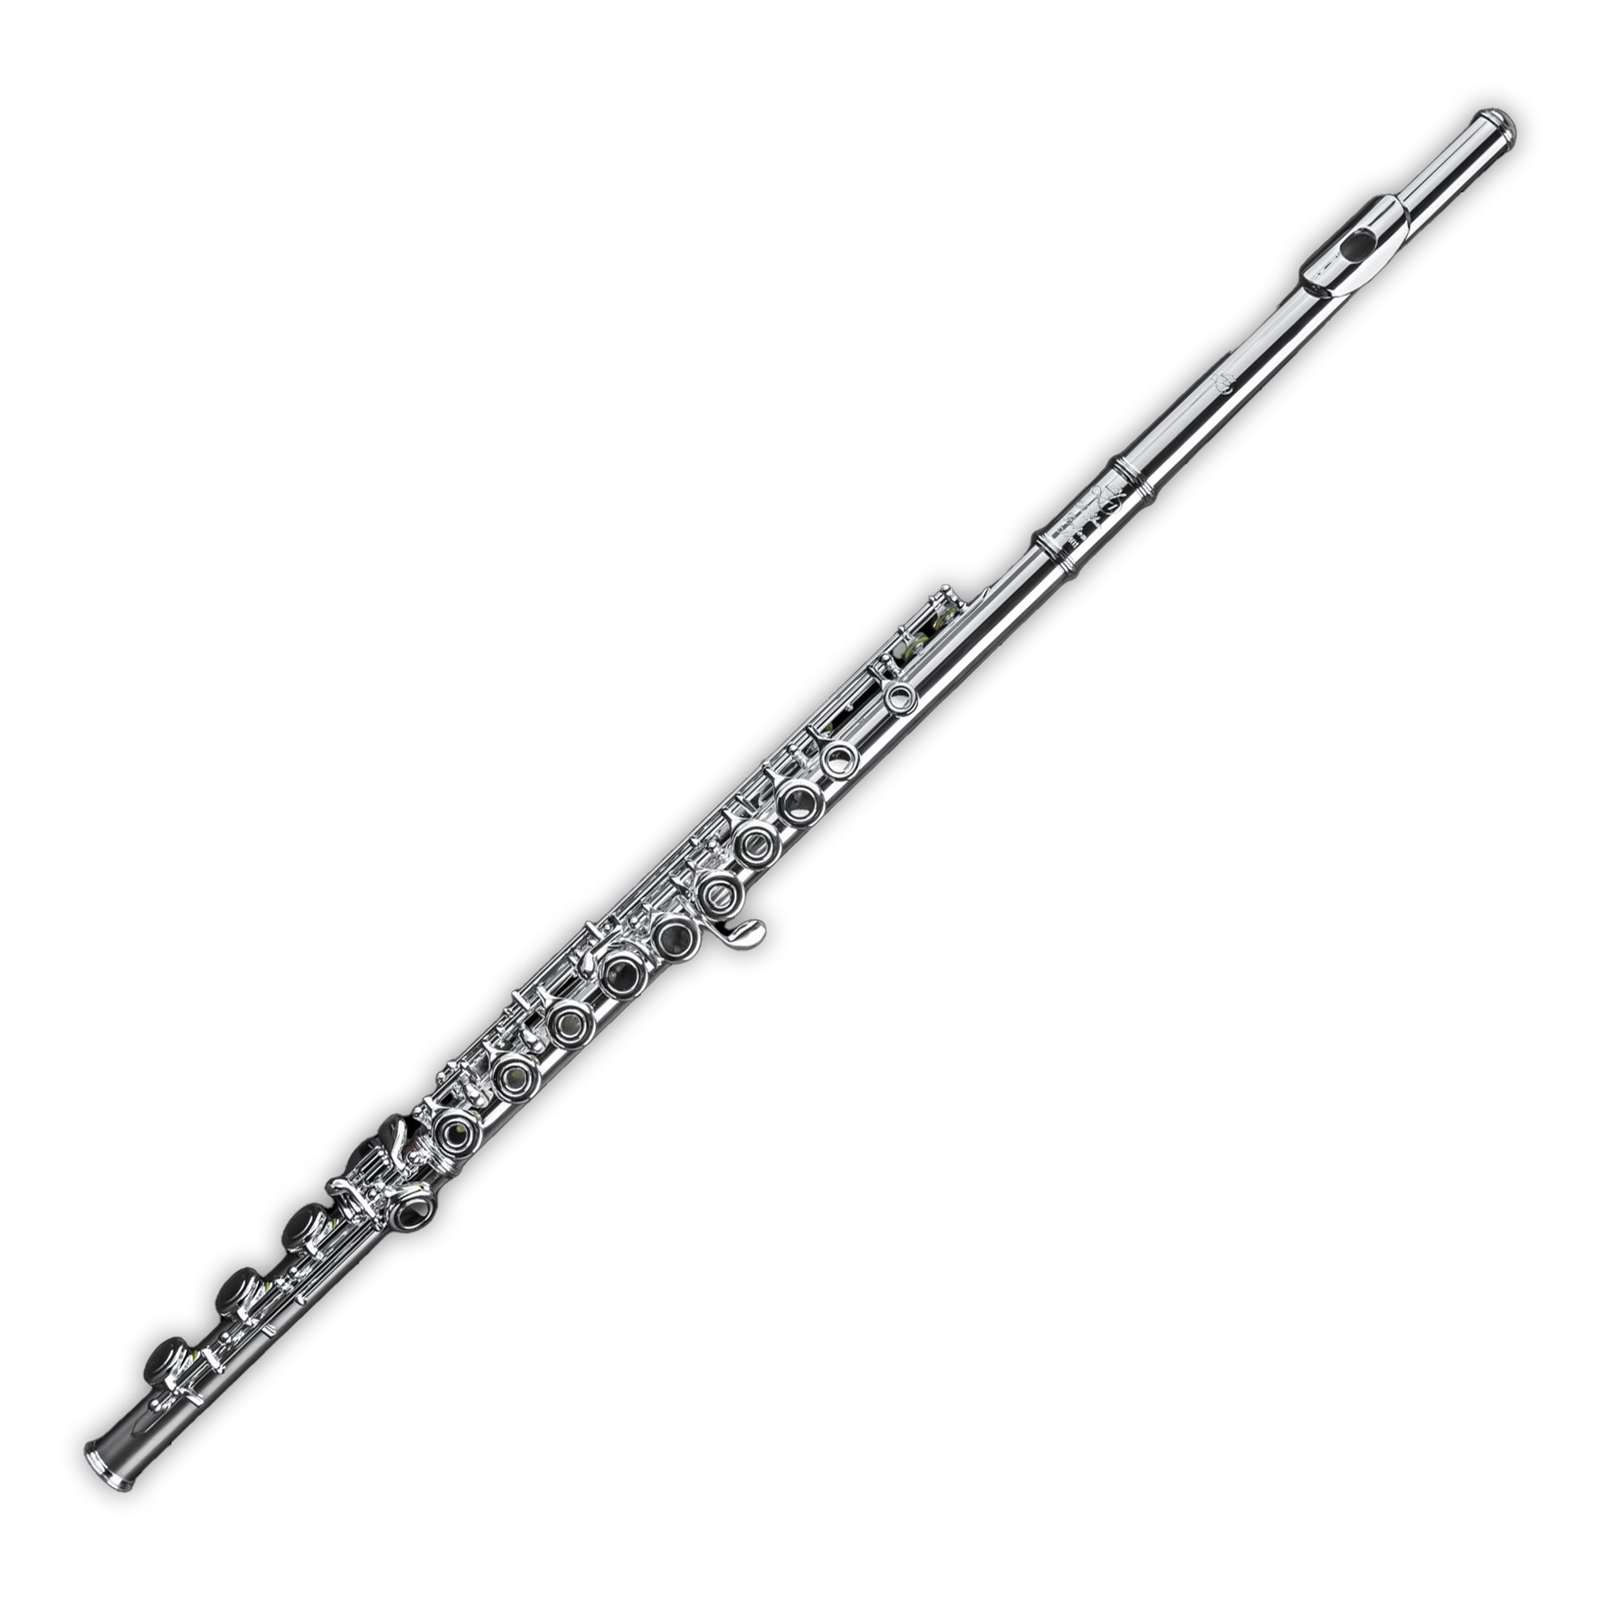 Di Zhao DZ 401 Series Step-Up Flute